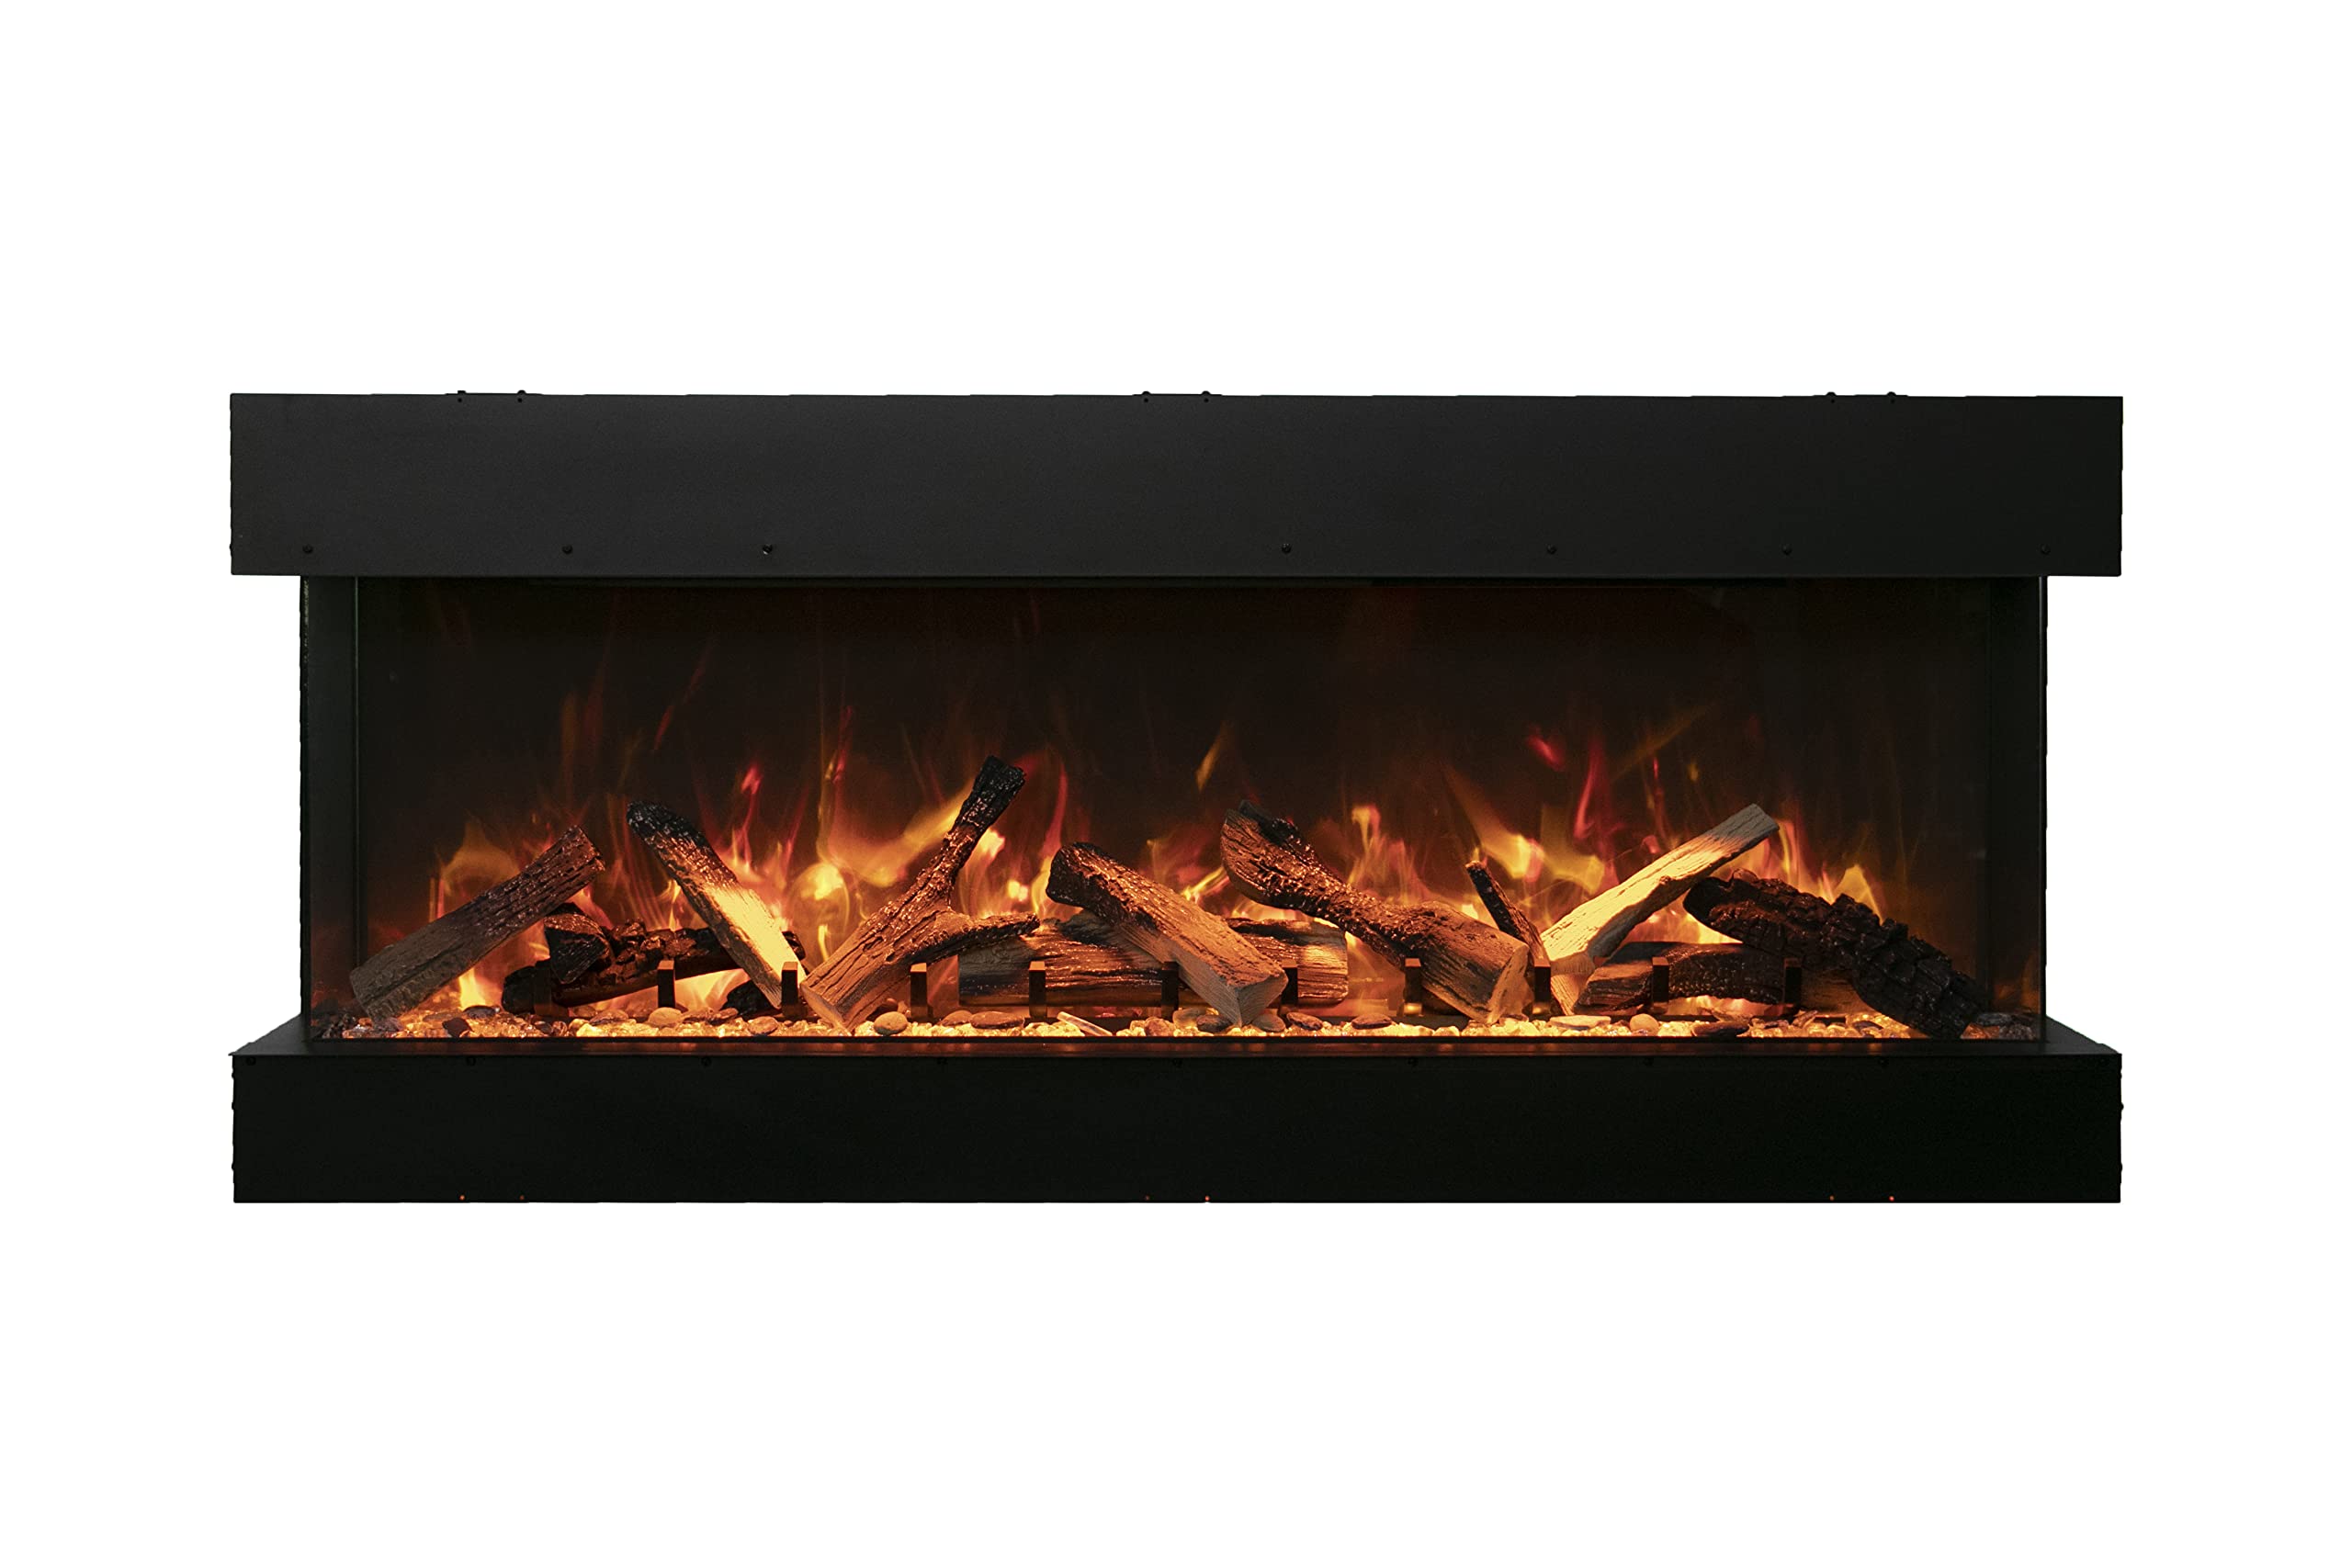 60-TRU-View-XL XT - 3 Sided Electric Fireplace 60 Inch, 3-Sided Glass Fireplace Heater w/Remote Control & 8H Timer, Thermostat, Black, Adjustable Brightness, Realistic Flame Effects